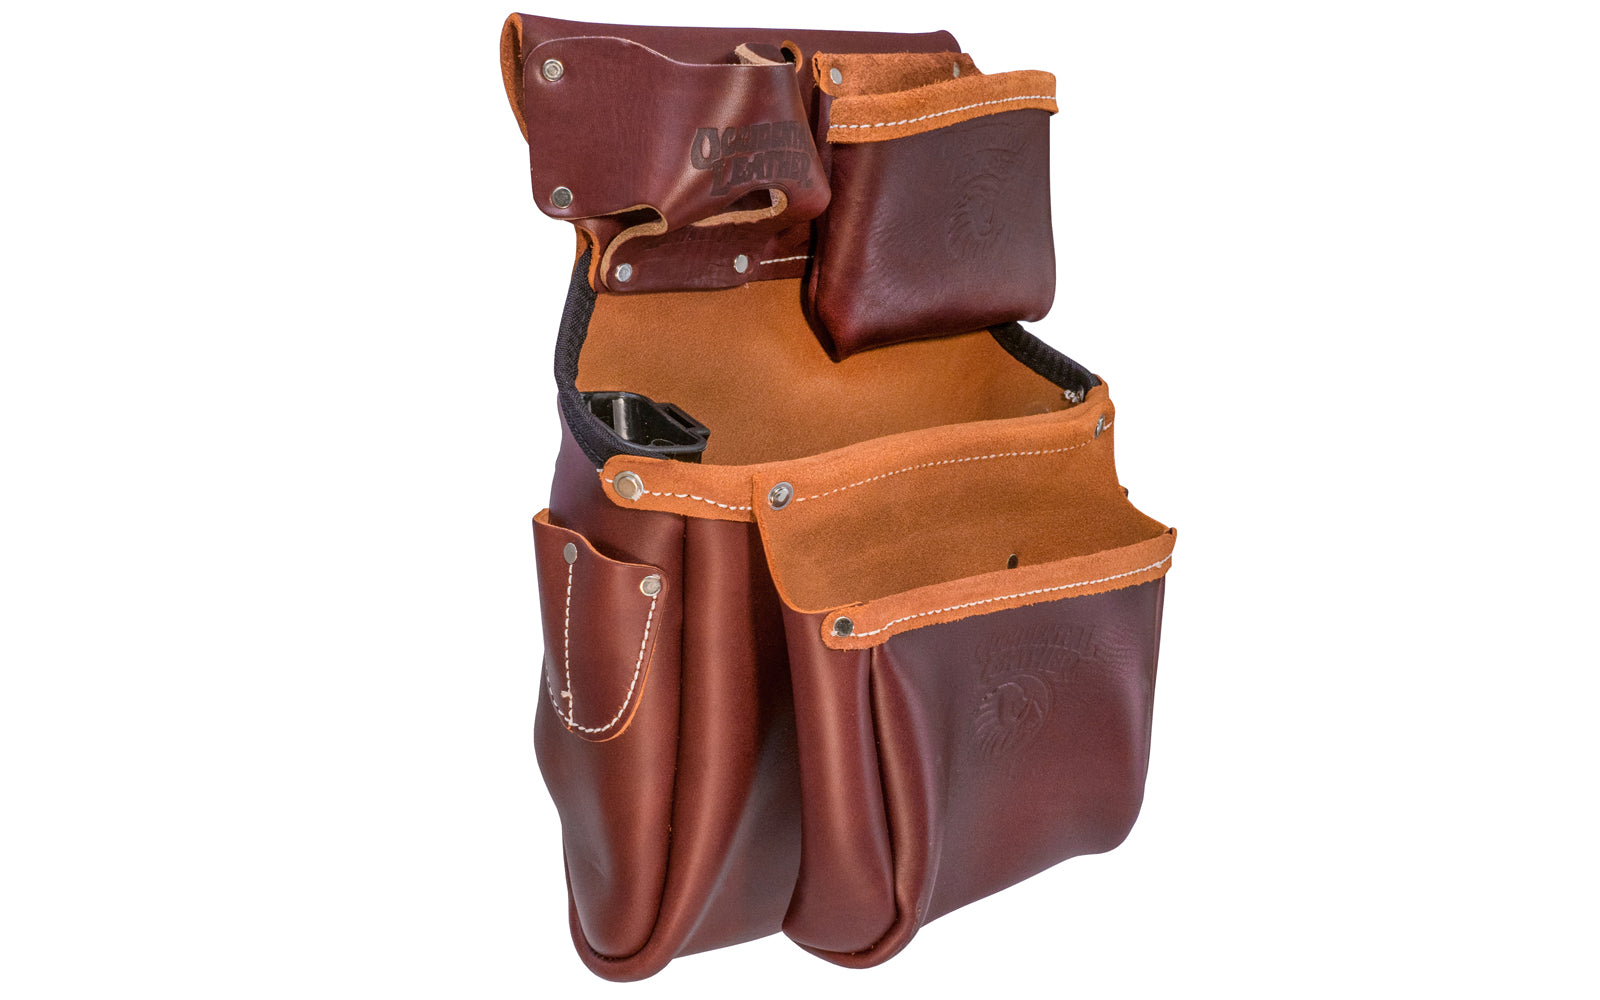 Occidental Leather "Big Oxy" Leather Fastener Bag ~ 5525 - Genuine leather - Made in USA - 759244205800 - For tri-square, cat’s paw, driver bits, angle square, tape pocket fits up to a 35’ tape - 10 holders for pencils, knife, lumber crayon, chisel, torpedo level, hammer - Three Pouch Tool Bag - Big Oxy Leather Bag